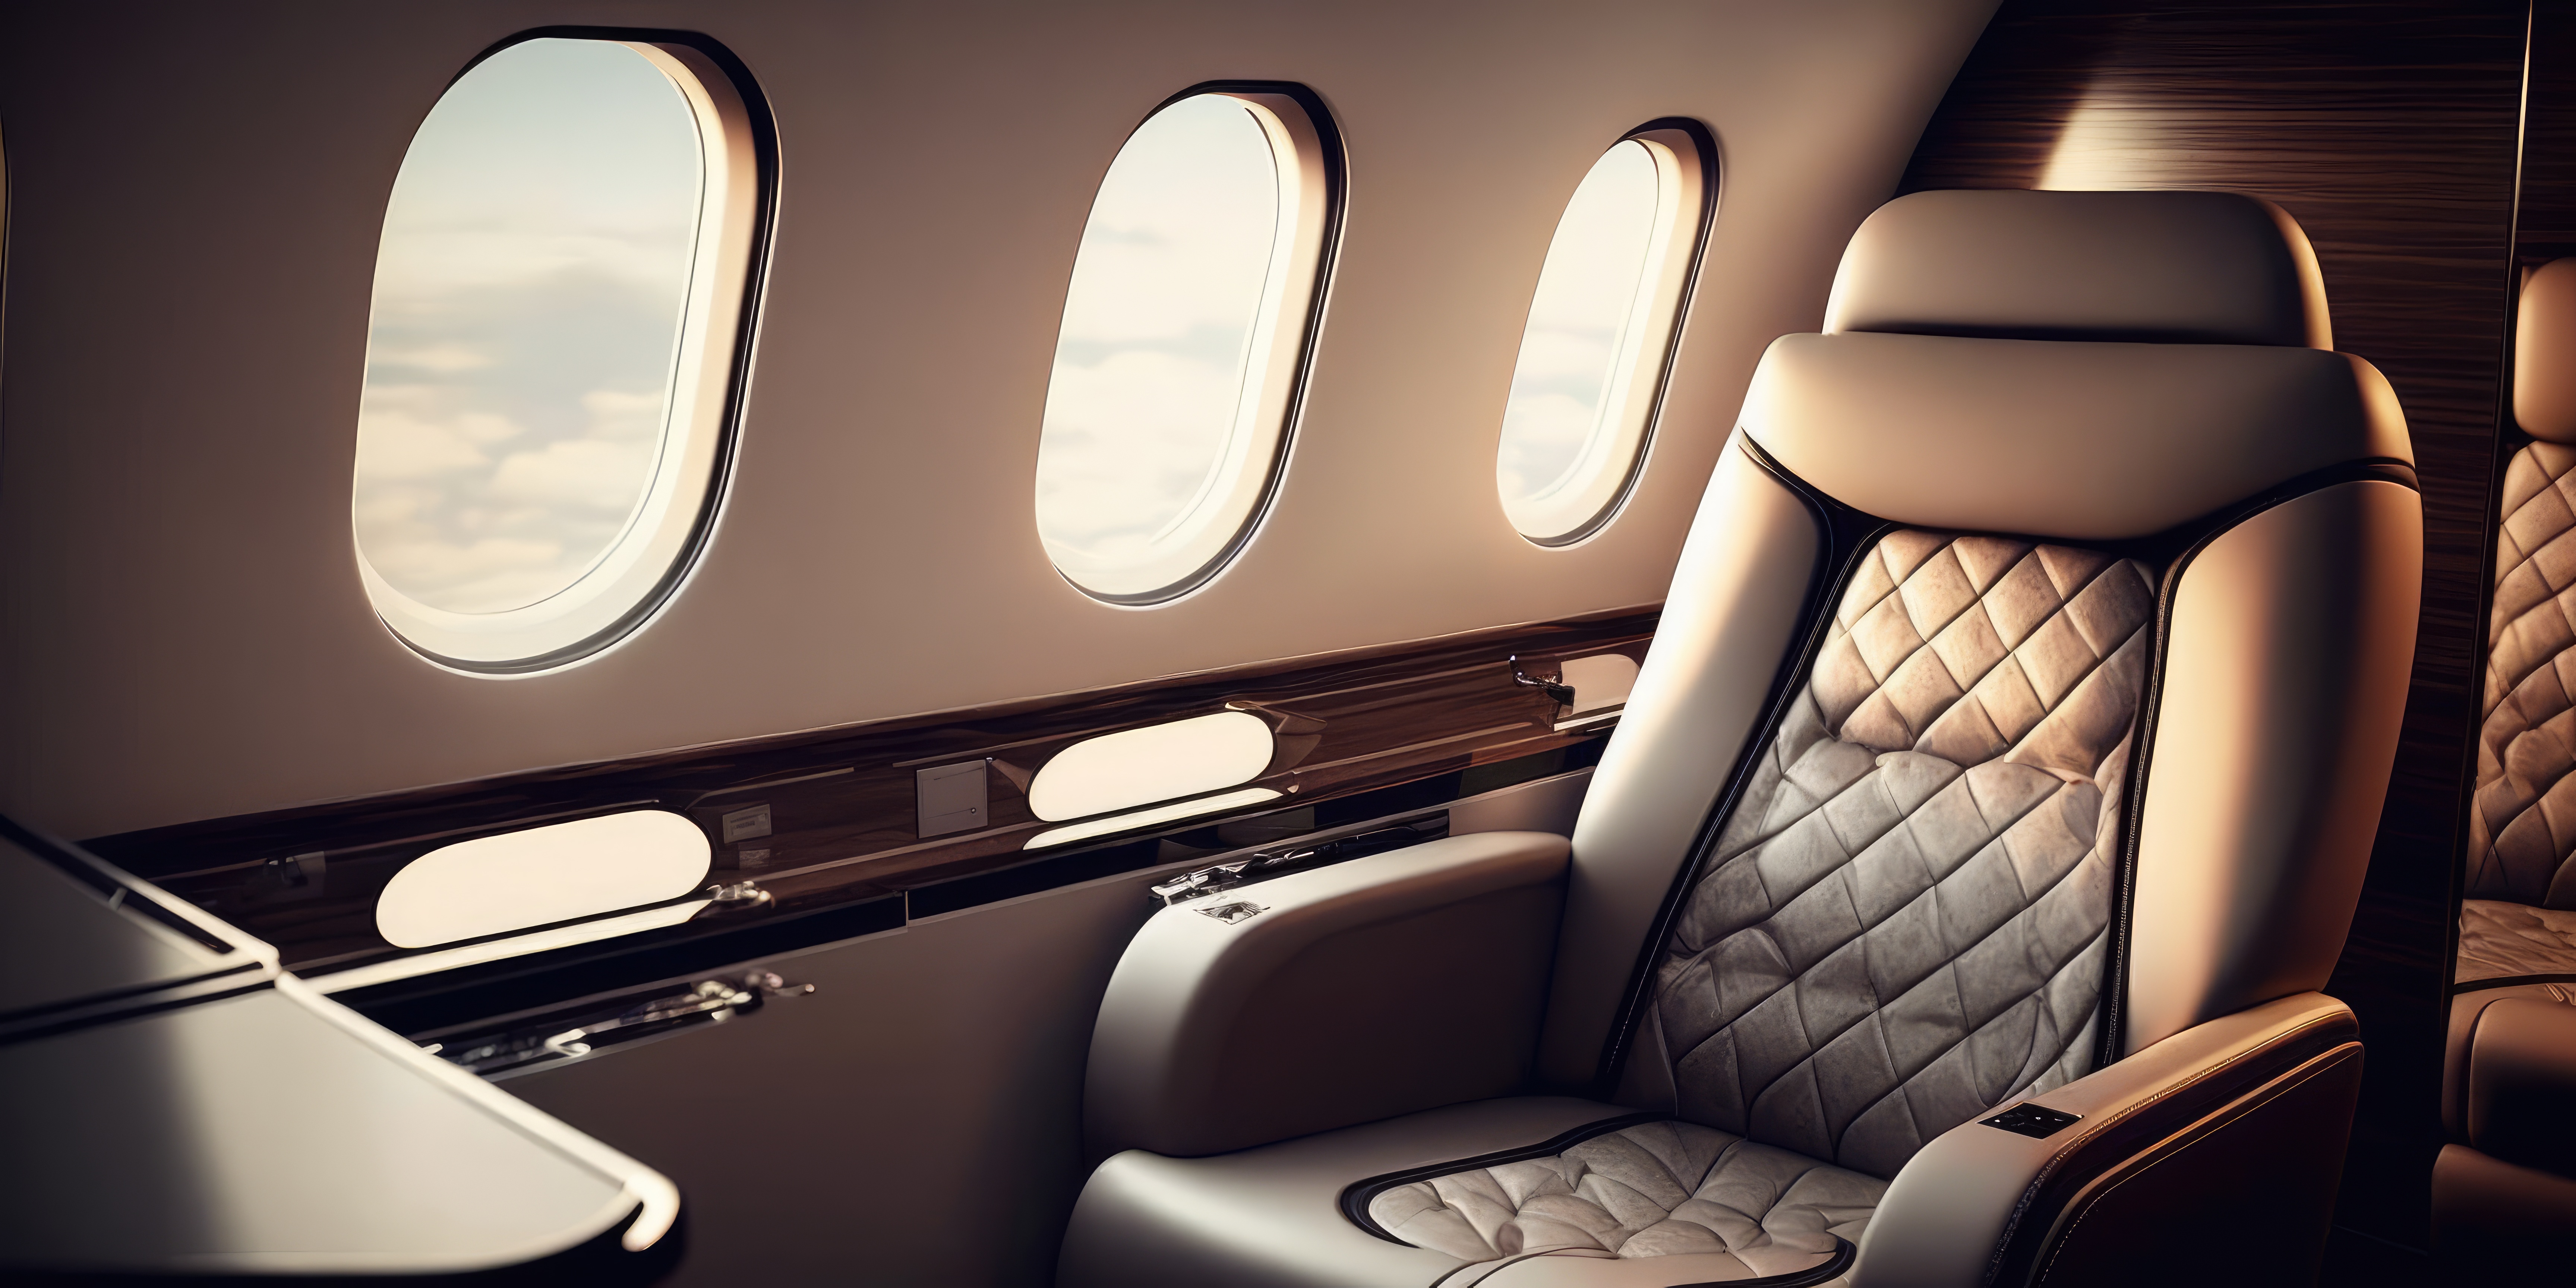 A first class seat in a plane indicating a luxurious experience.